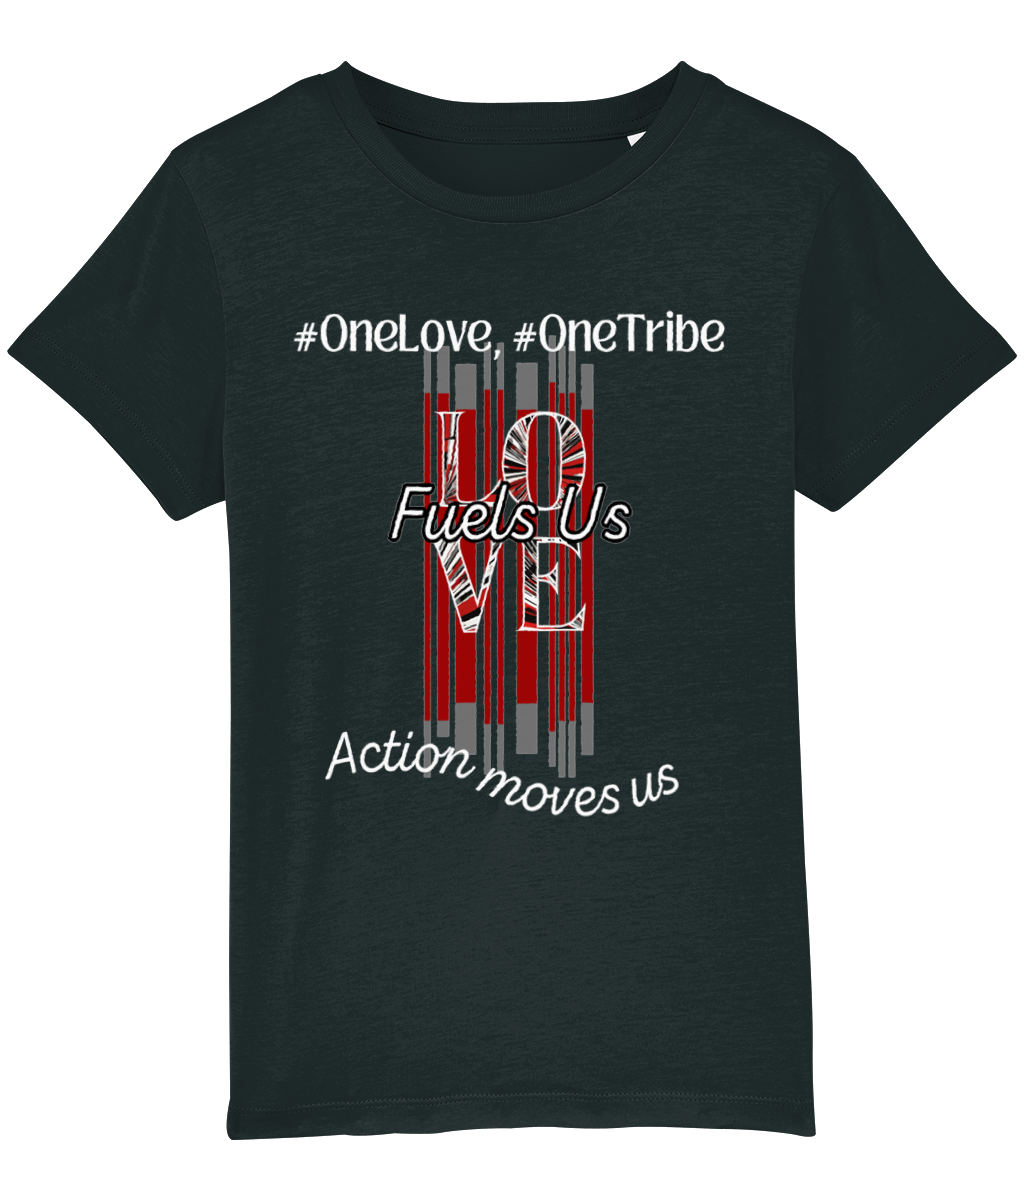 Organic Cotton Kids T-Shirt - #OneLove,OneTribe Love-Fuels us, Action moves us